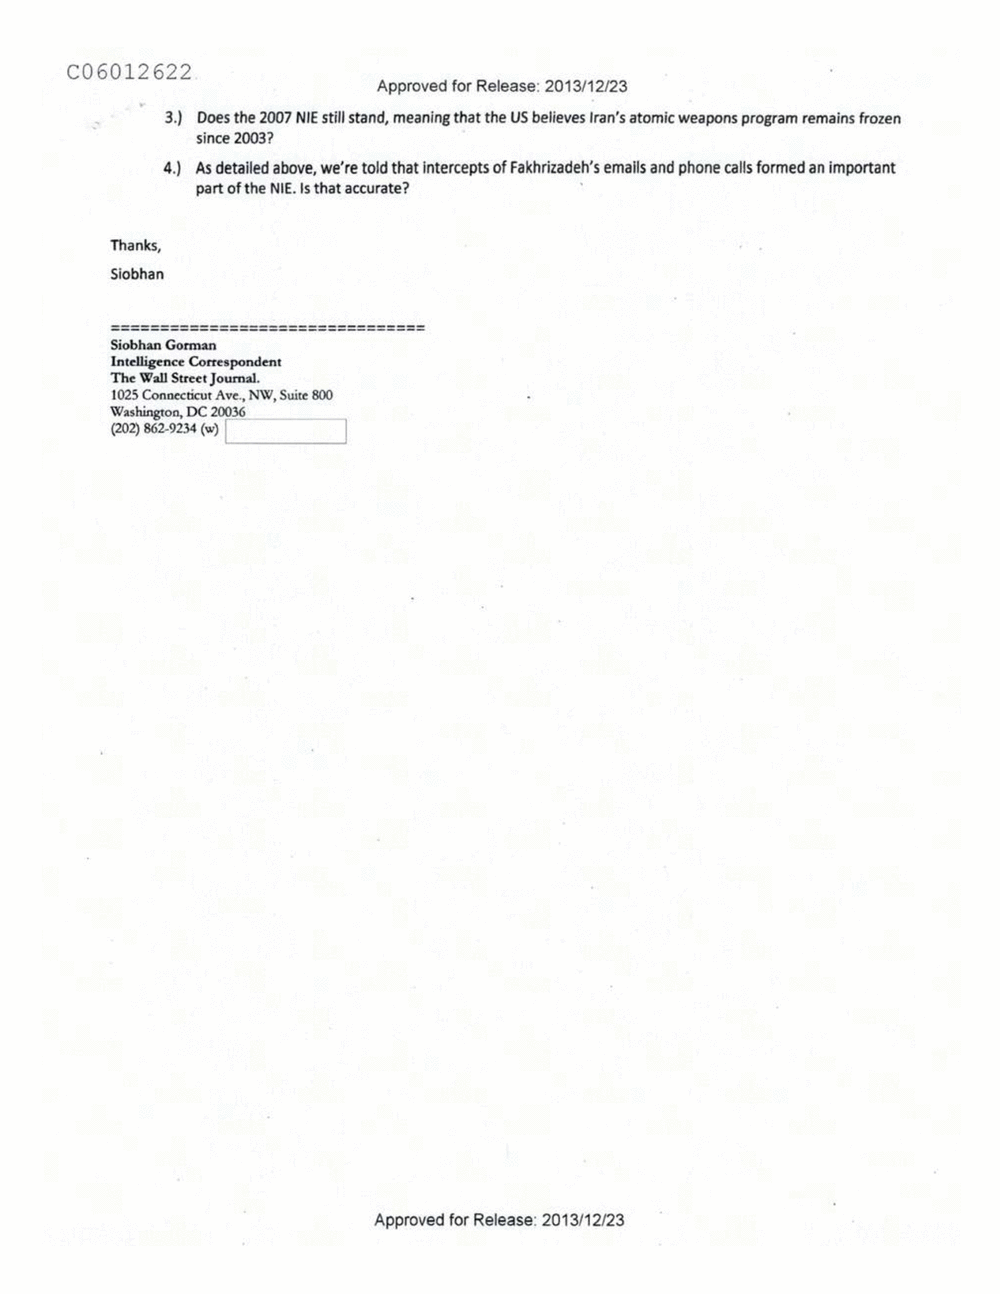 Page 176 from Email Correspondence Between Reporters and CIA Flacks